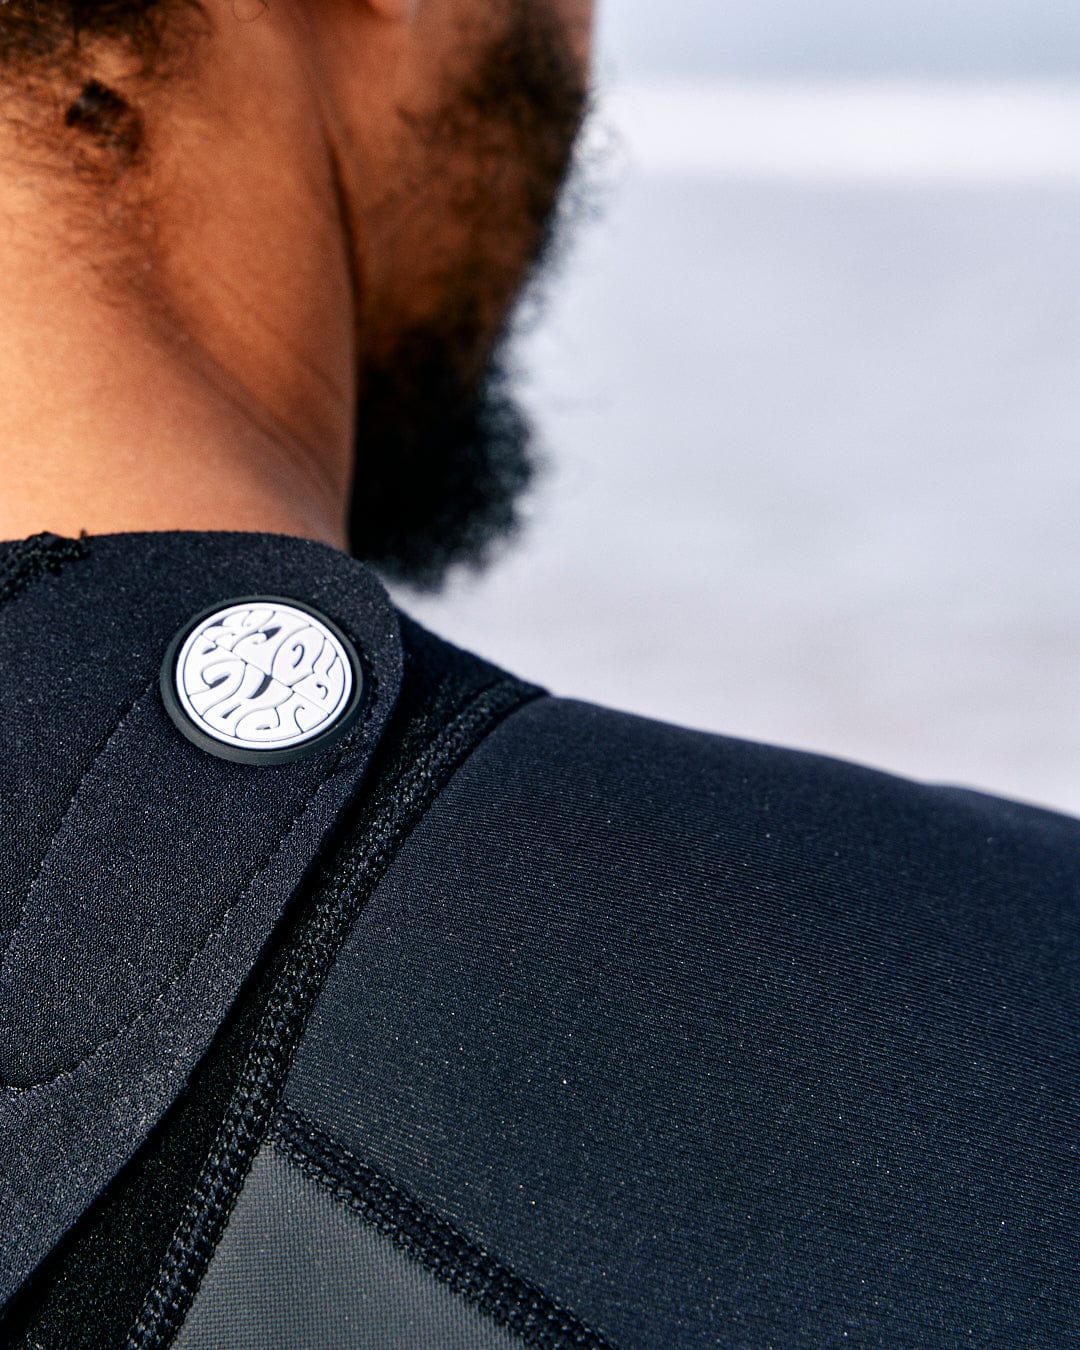 Close-up of a person wearing a black neoprene shoulder brace with a circular white Saltrock logo on the strap.